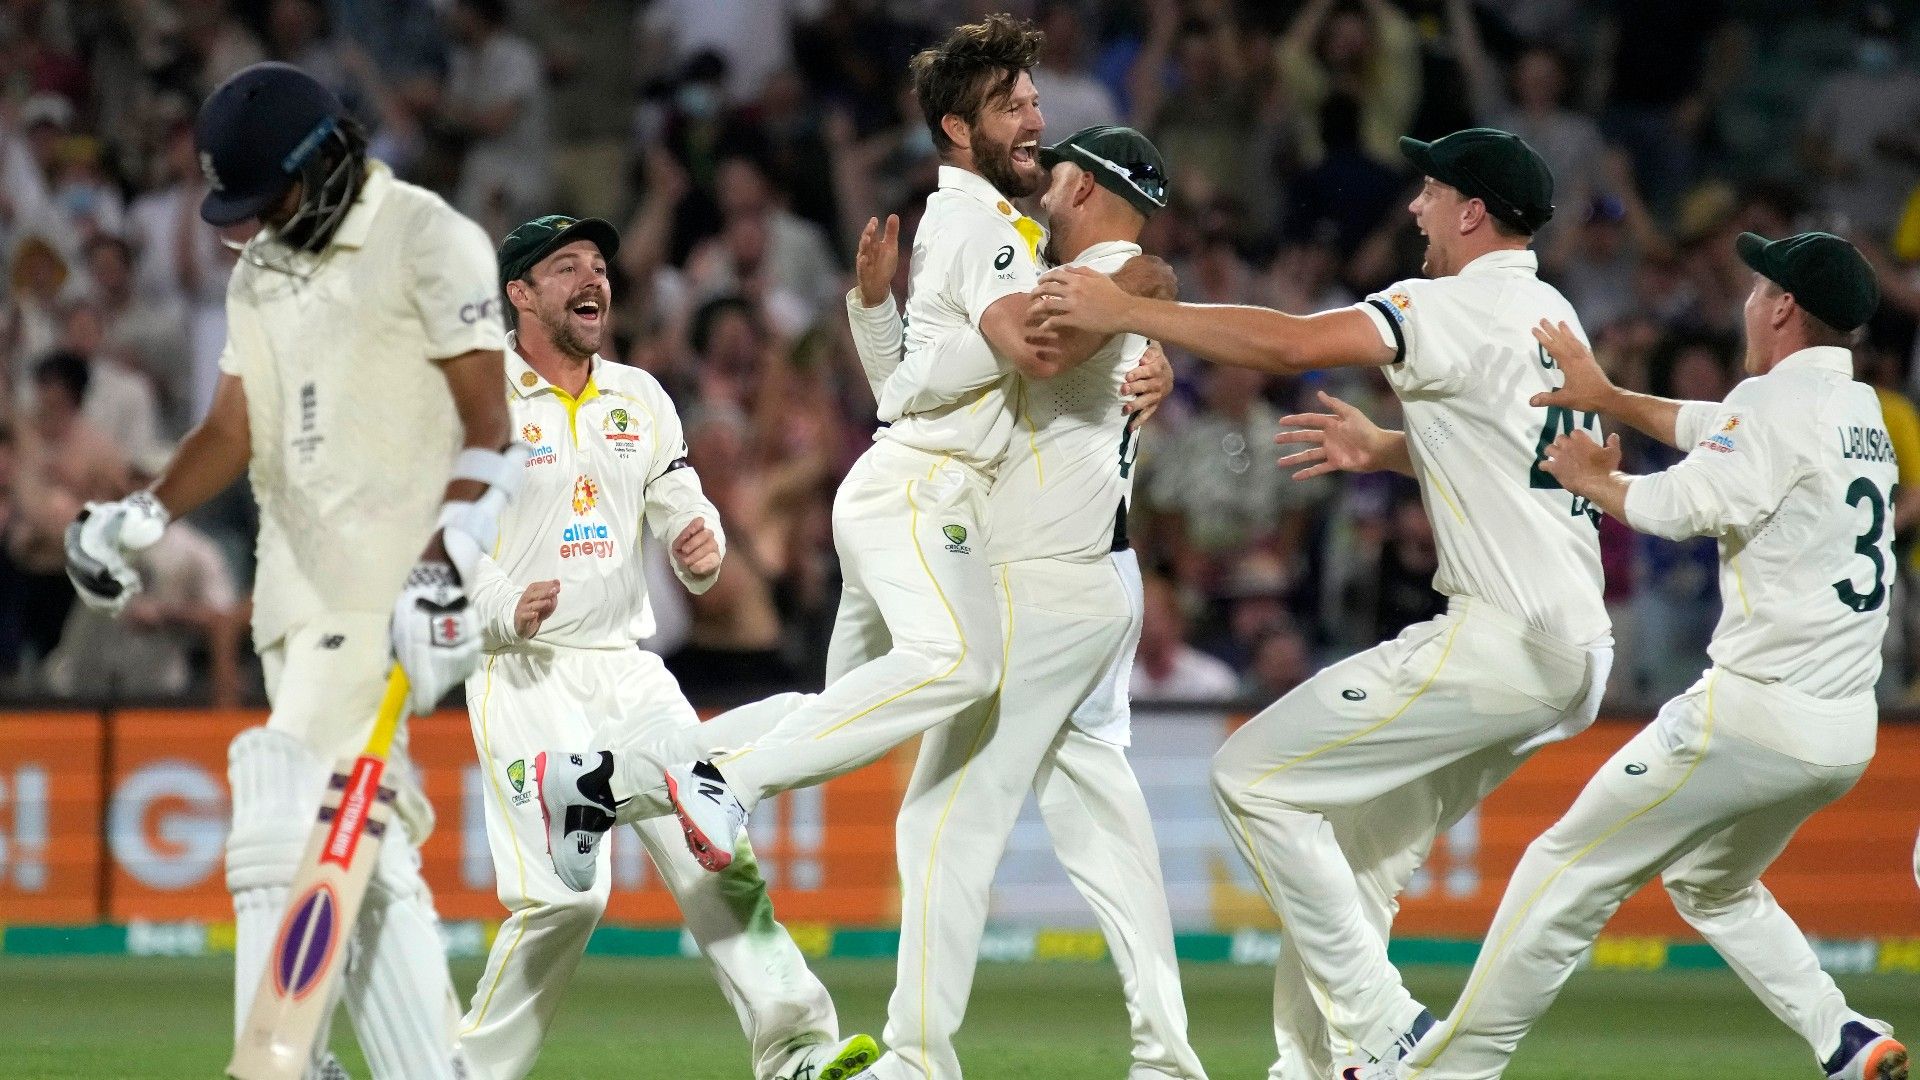 Australia well on top after day two as weather saves England